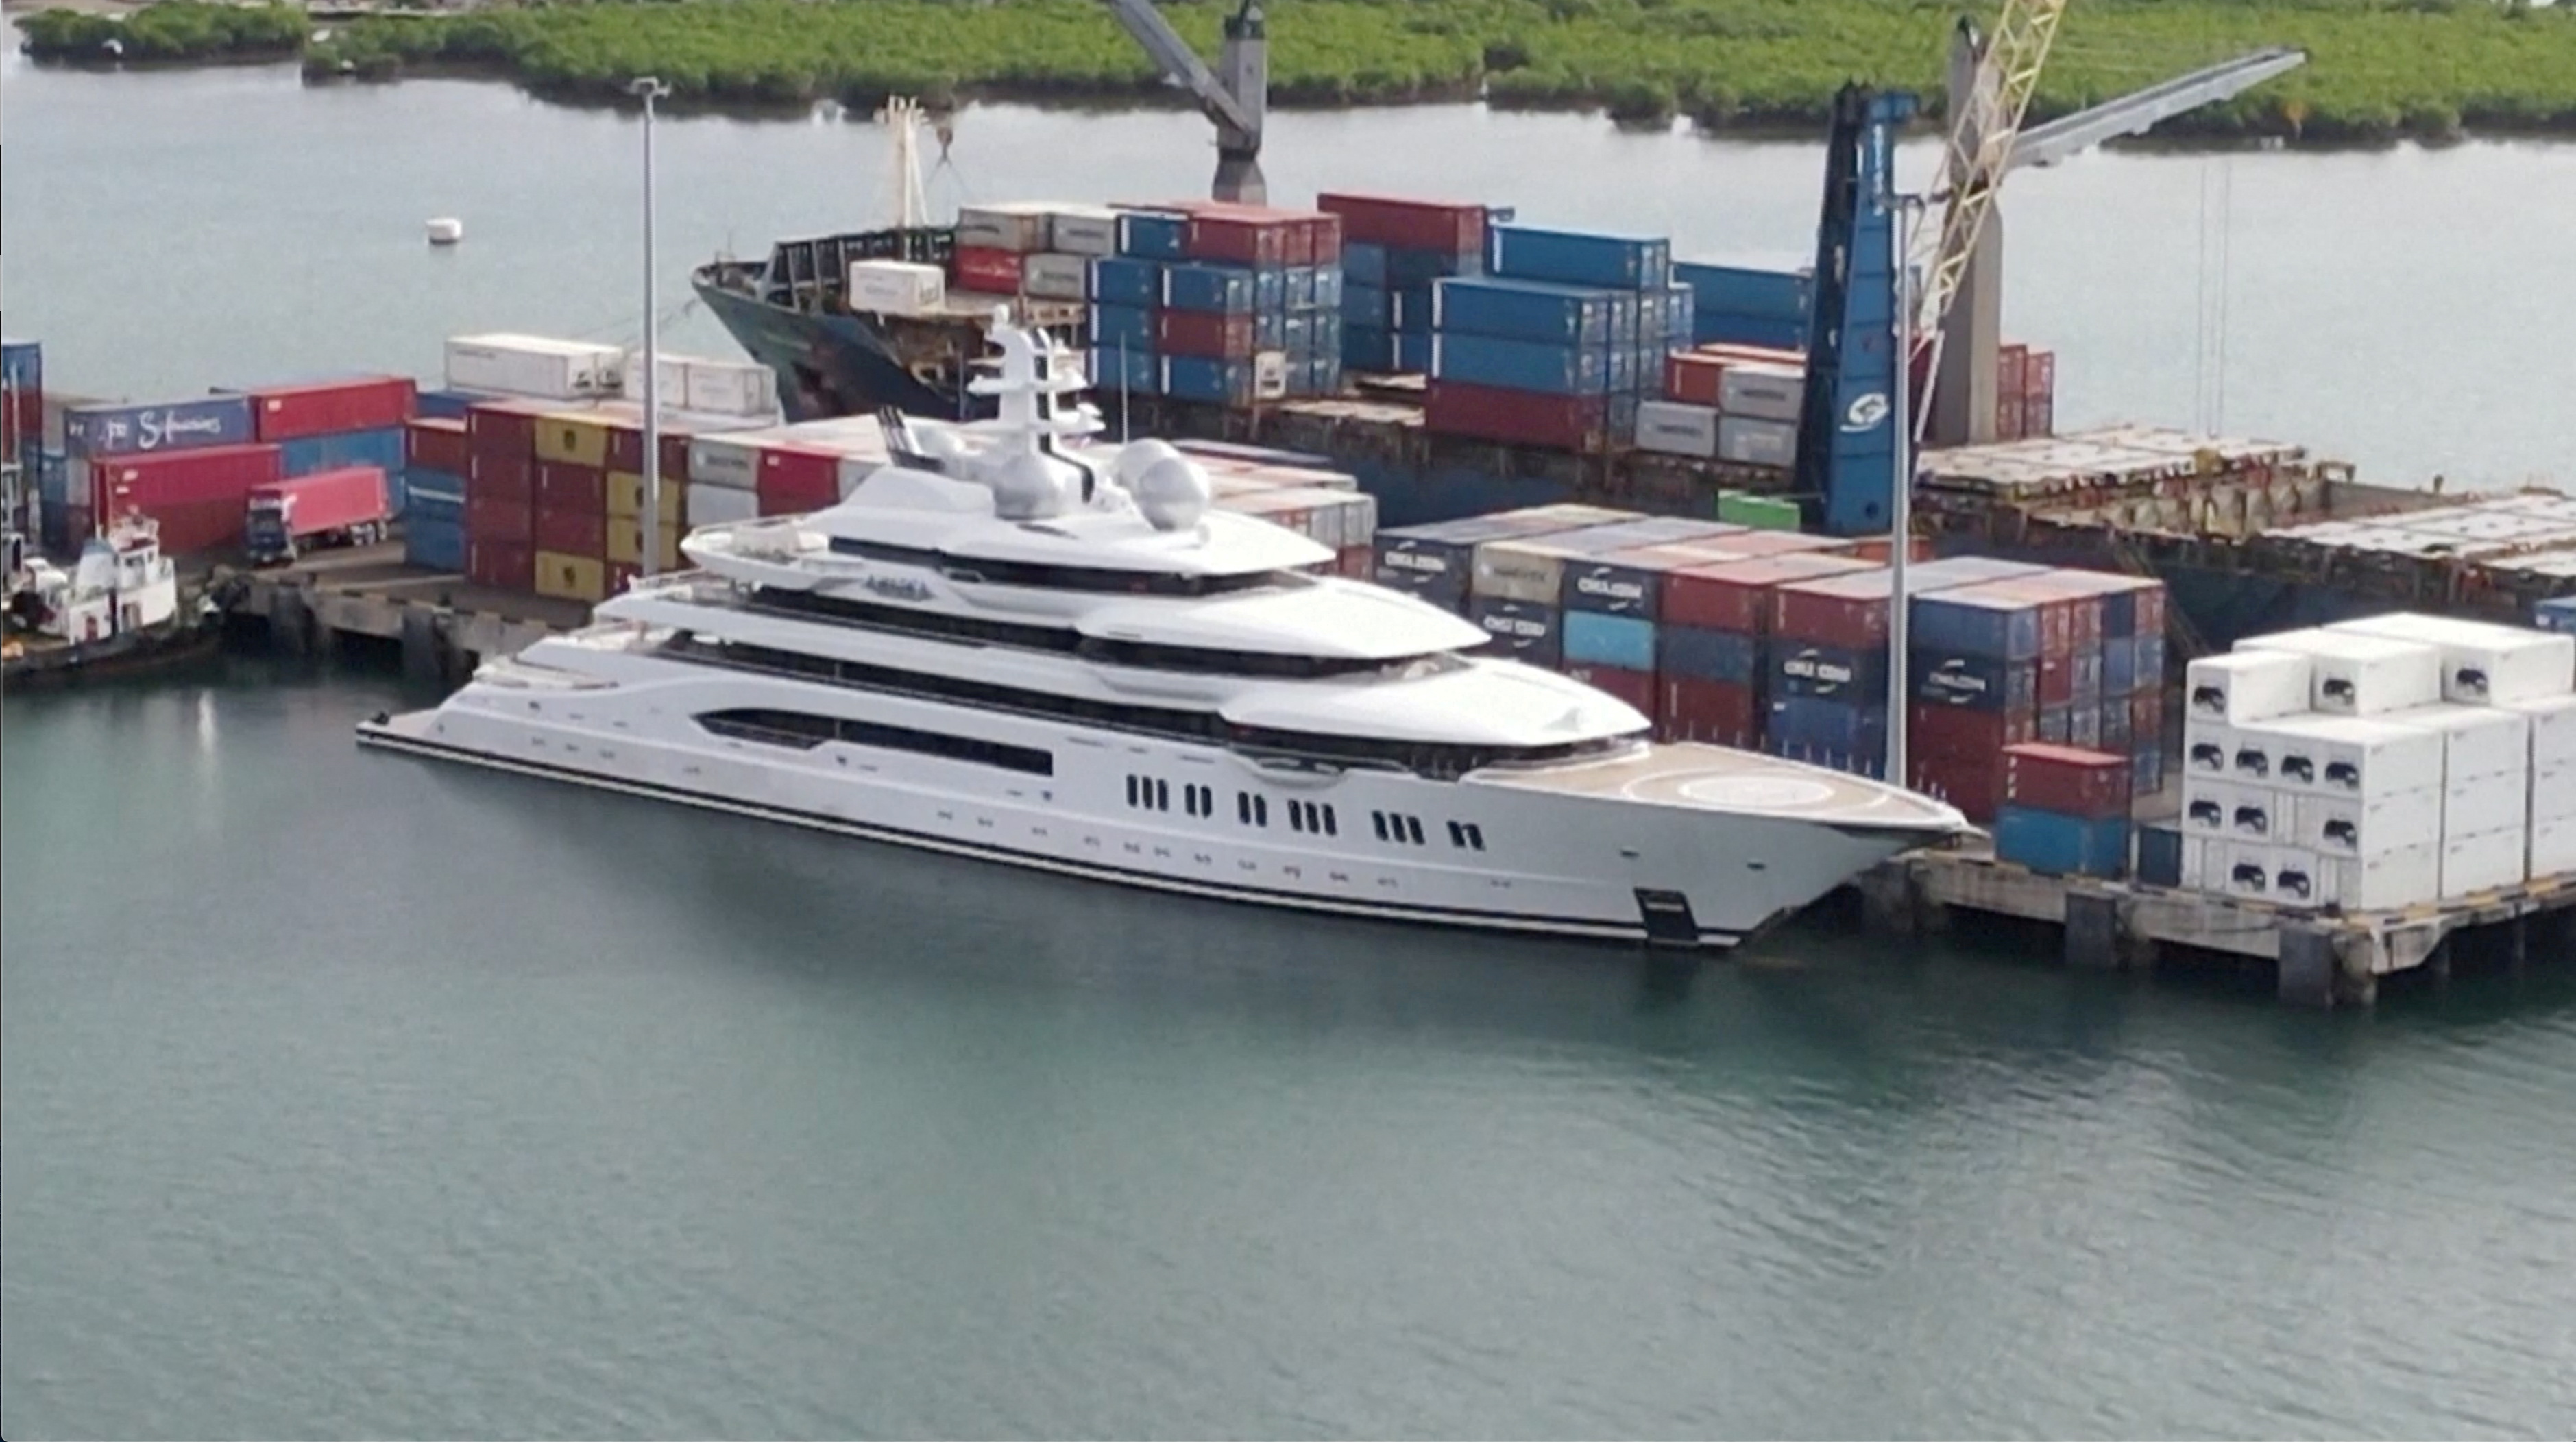 A screen grab from a drone video footage shows a Russian-owned superyacht 'Amadea' docked at Queens Wharf in Lautoka